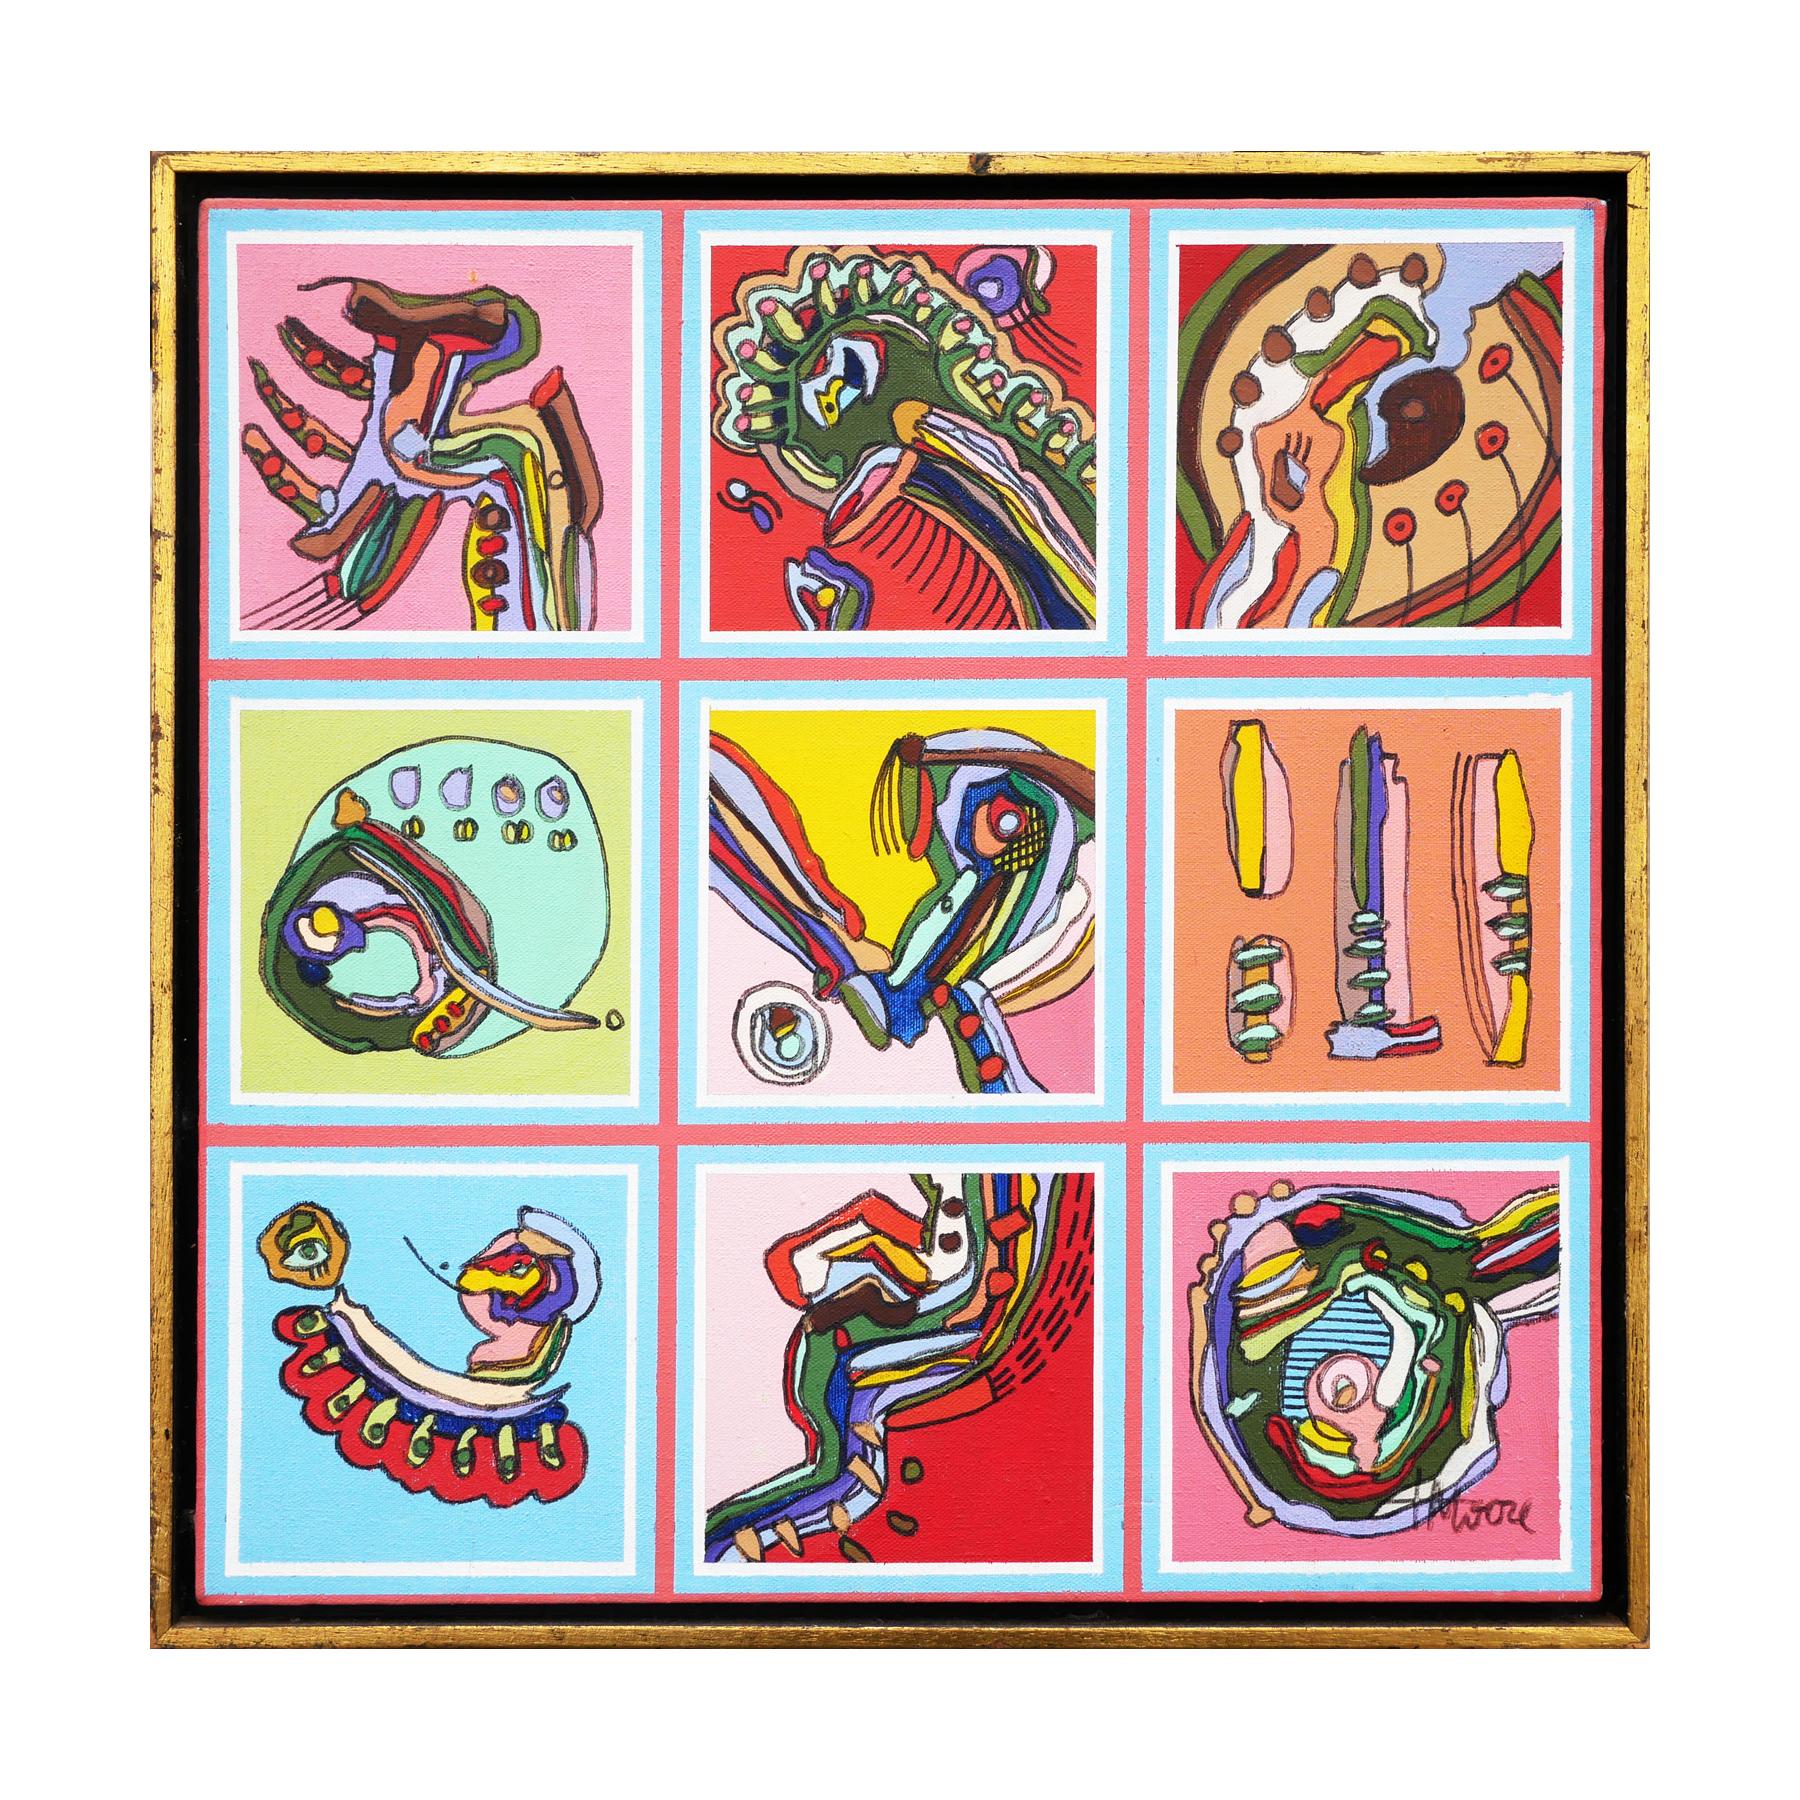 Colorful abstract contemporary painting by artist T. Moore. The painting depicts a grid of 9 squares with colorful biomorphic shapes, patterns, and figures. The blocks are painted against a sky-blue background with pink grids. Signed by the artist